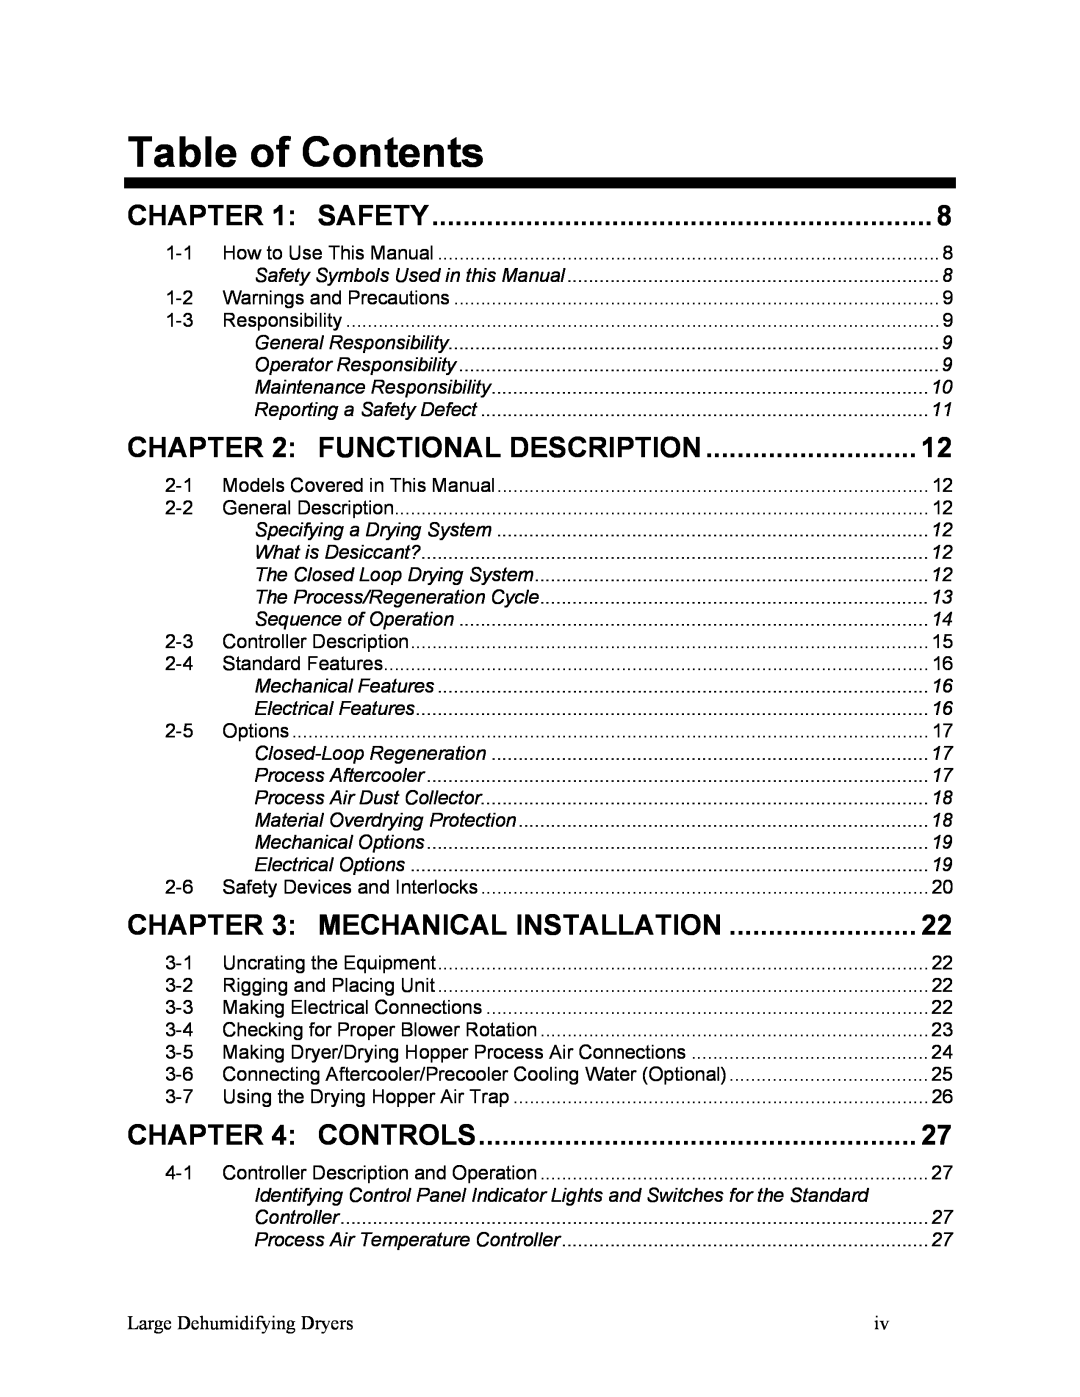 Sterling SDA 1000-5100 specifications Table of Contents, Safety, Functional Description, Mechanical Installation, Controls 